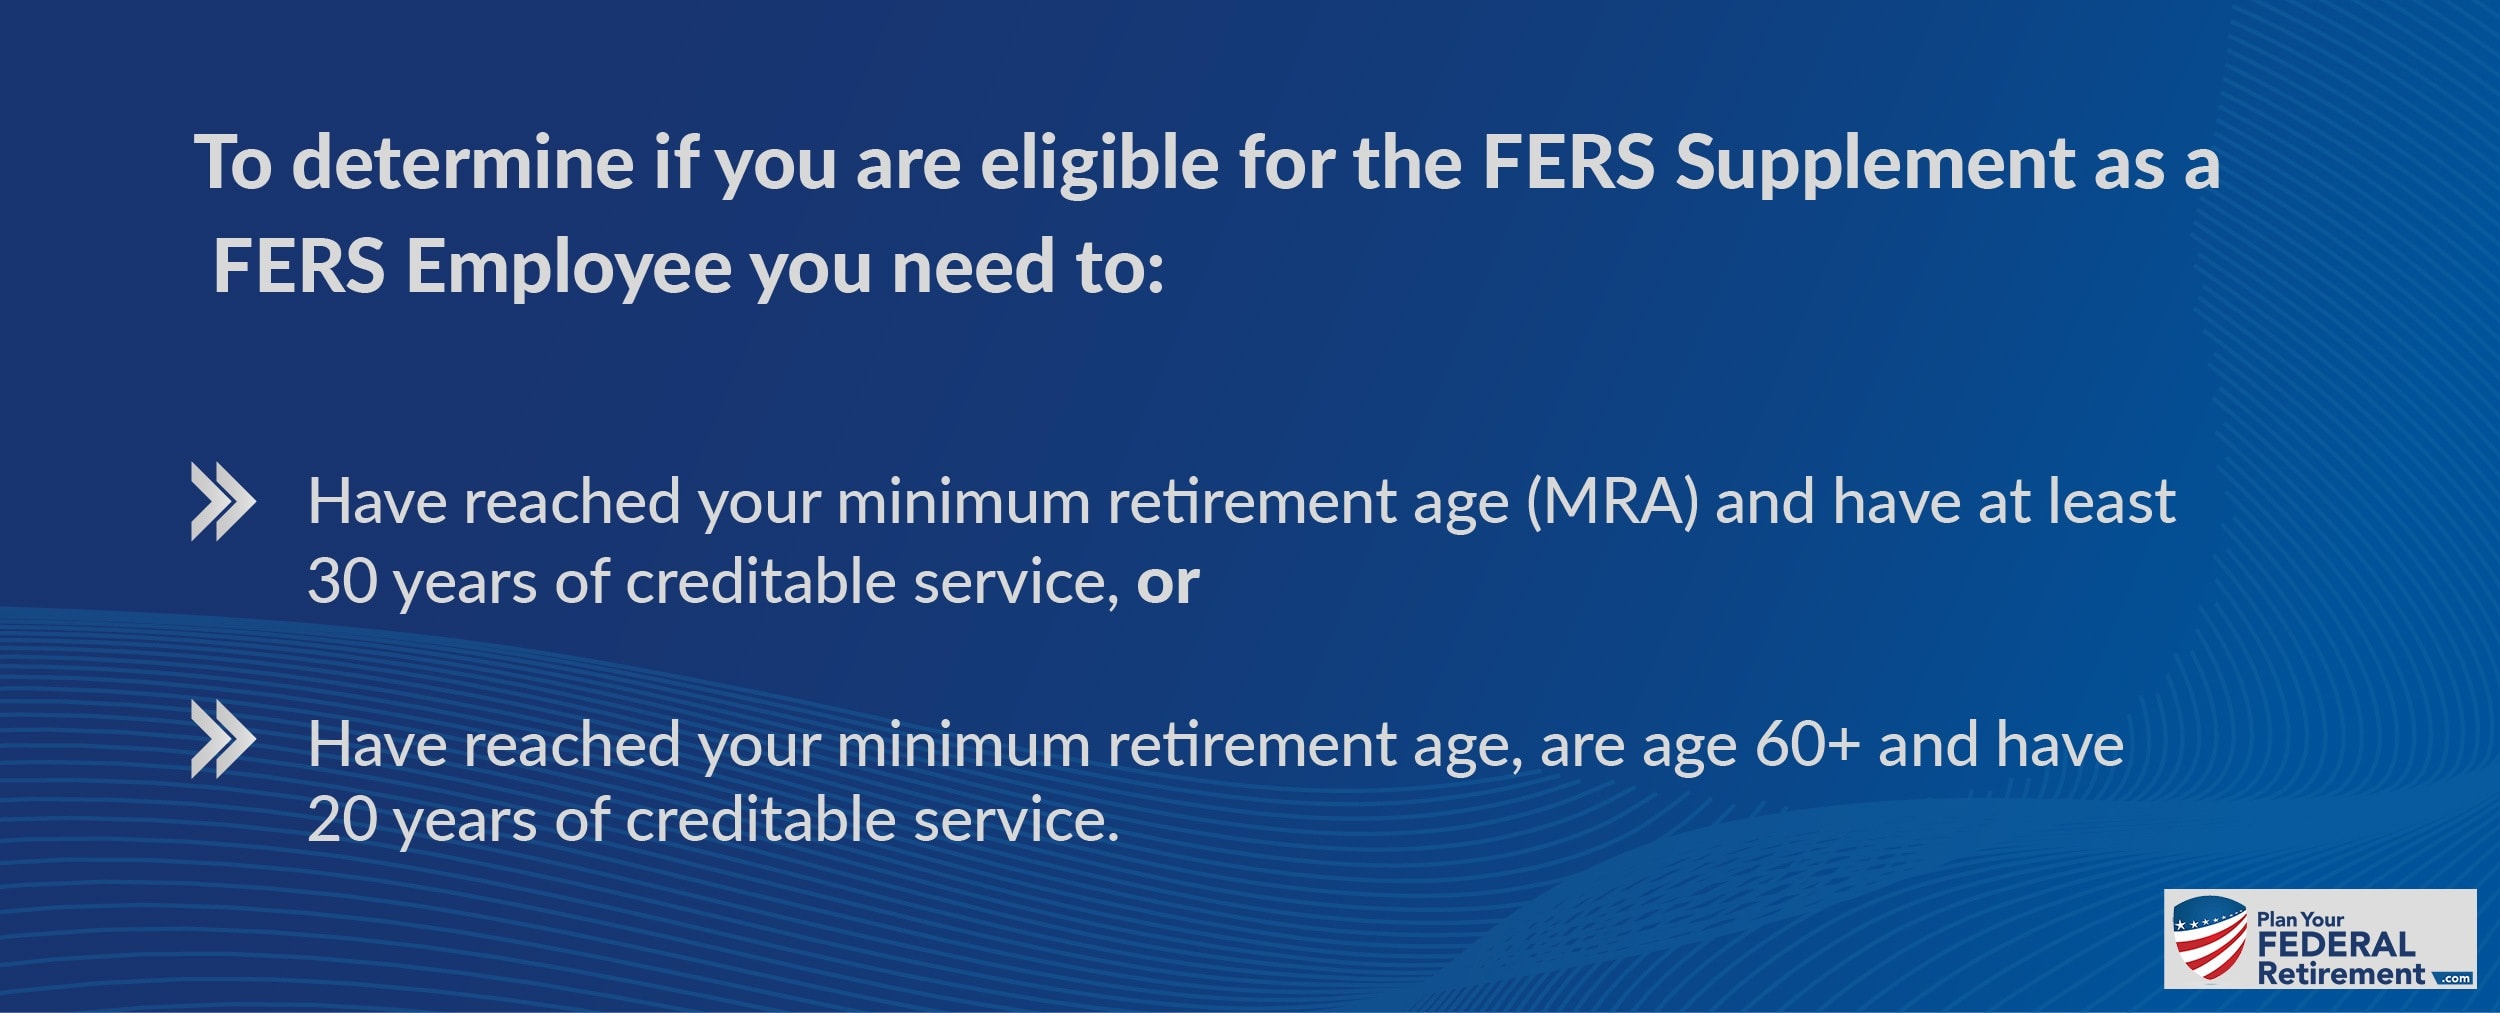 Eligibility Criteria for Employees applying for FERS Supplement